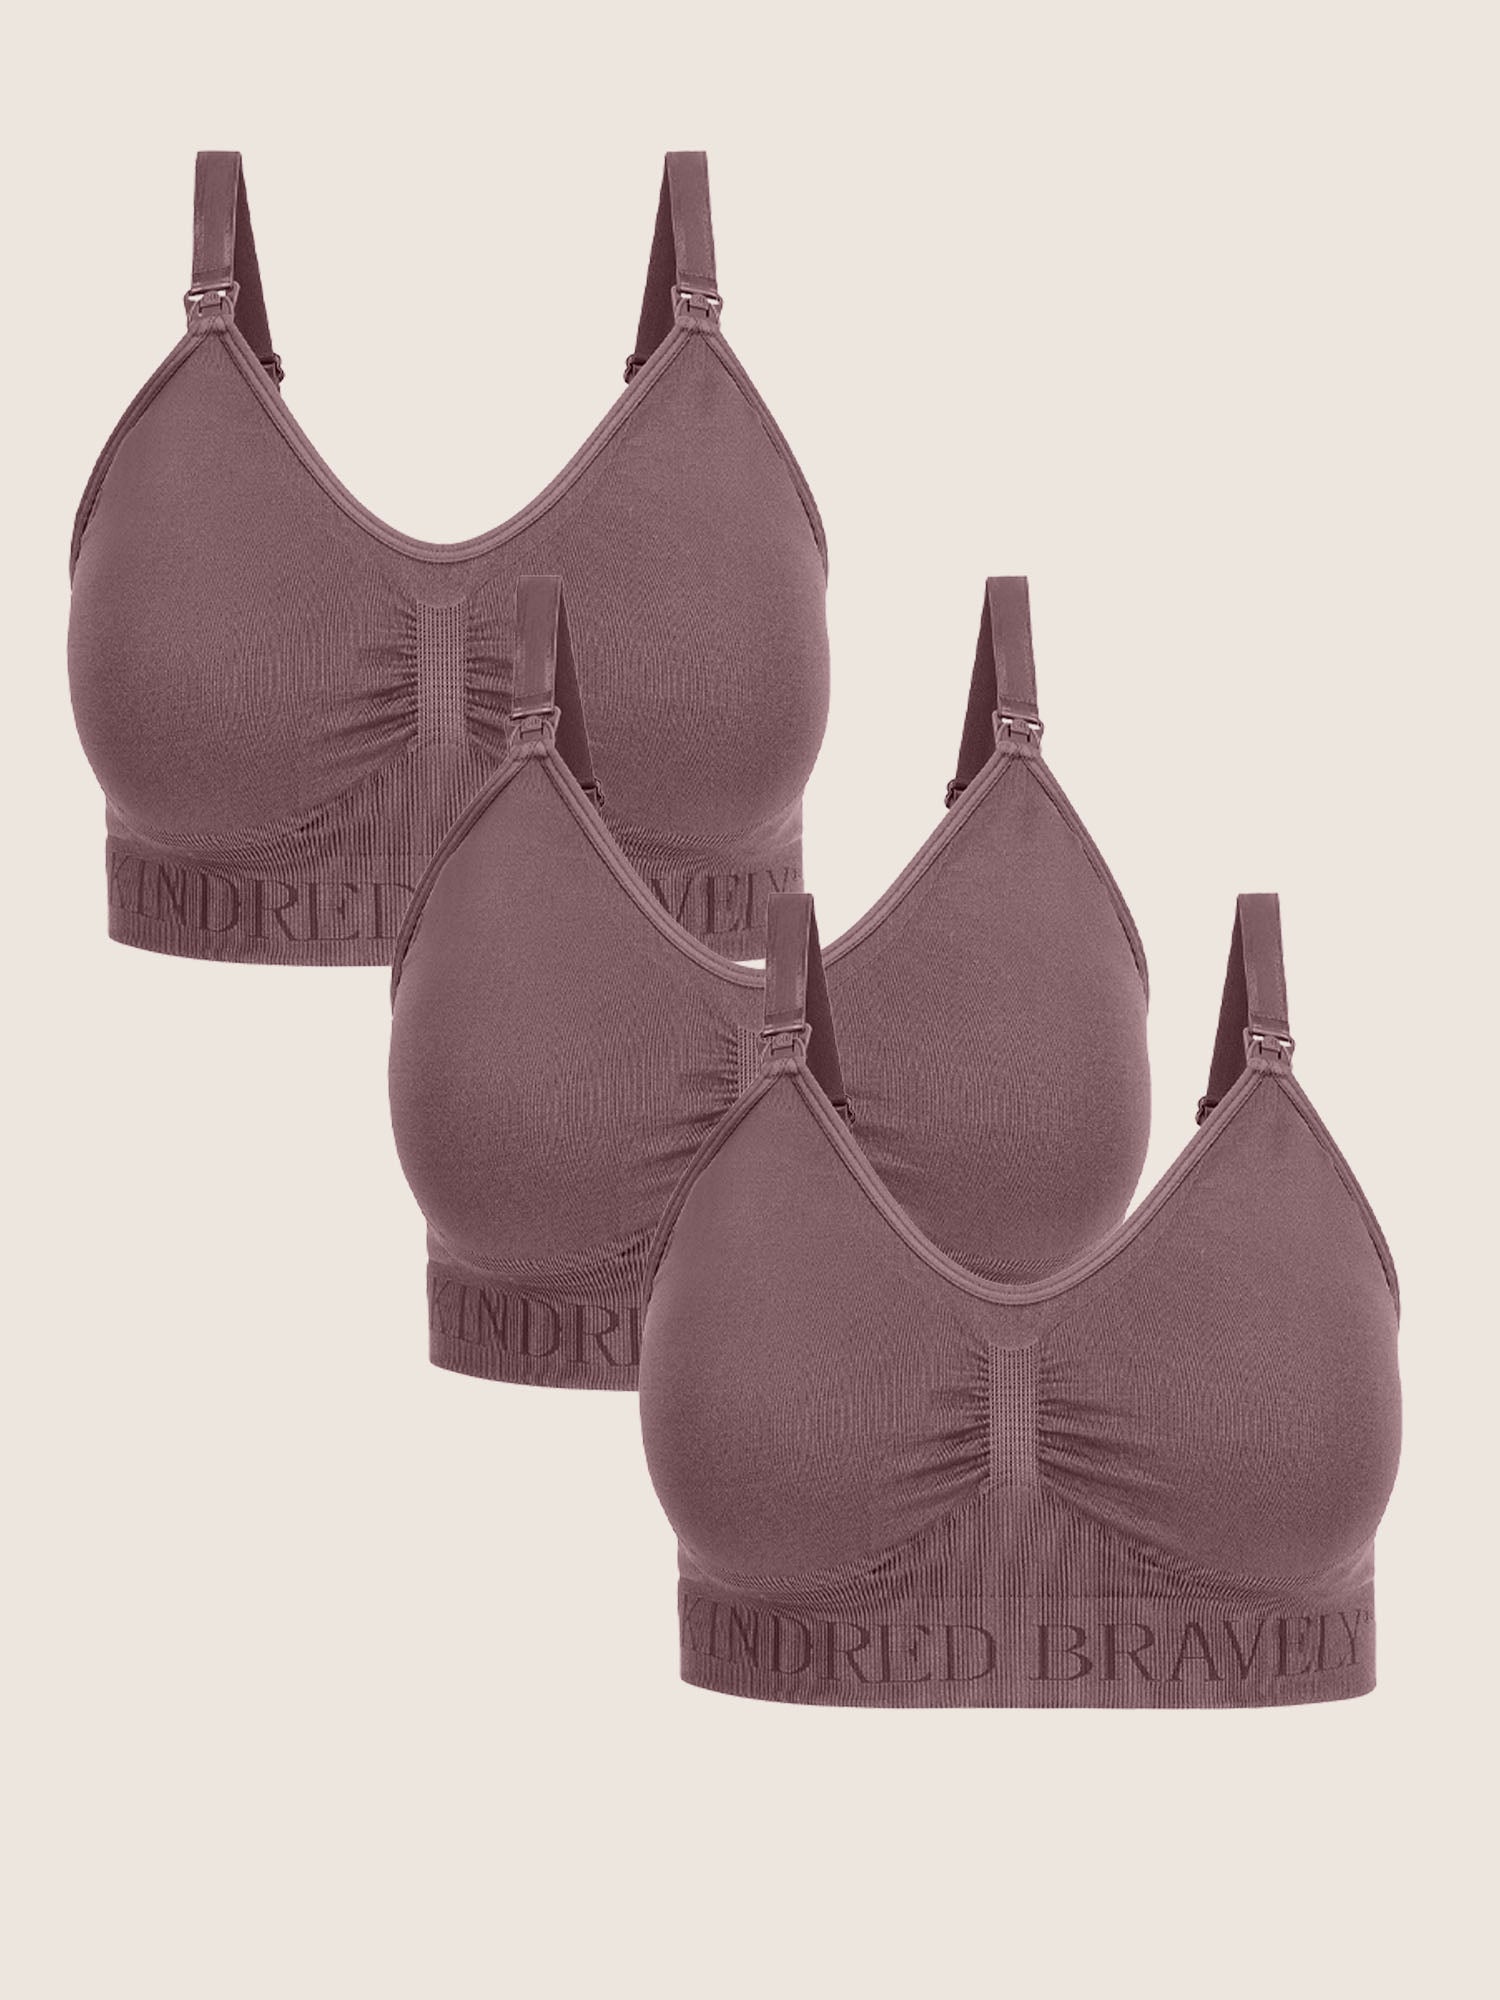 Kindred Bravely Simply Sublime Busty Seamless Nursing Bra for F, G, H, I  Cup  Wireless Maternity Bra (Grey, Small-Busty) : : Clothing,  Shoes & Accessories